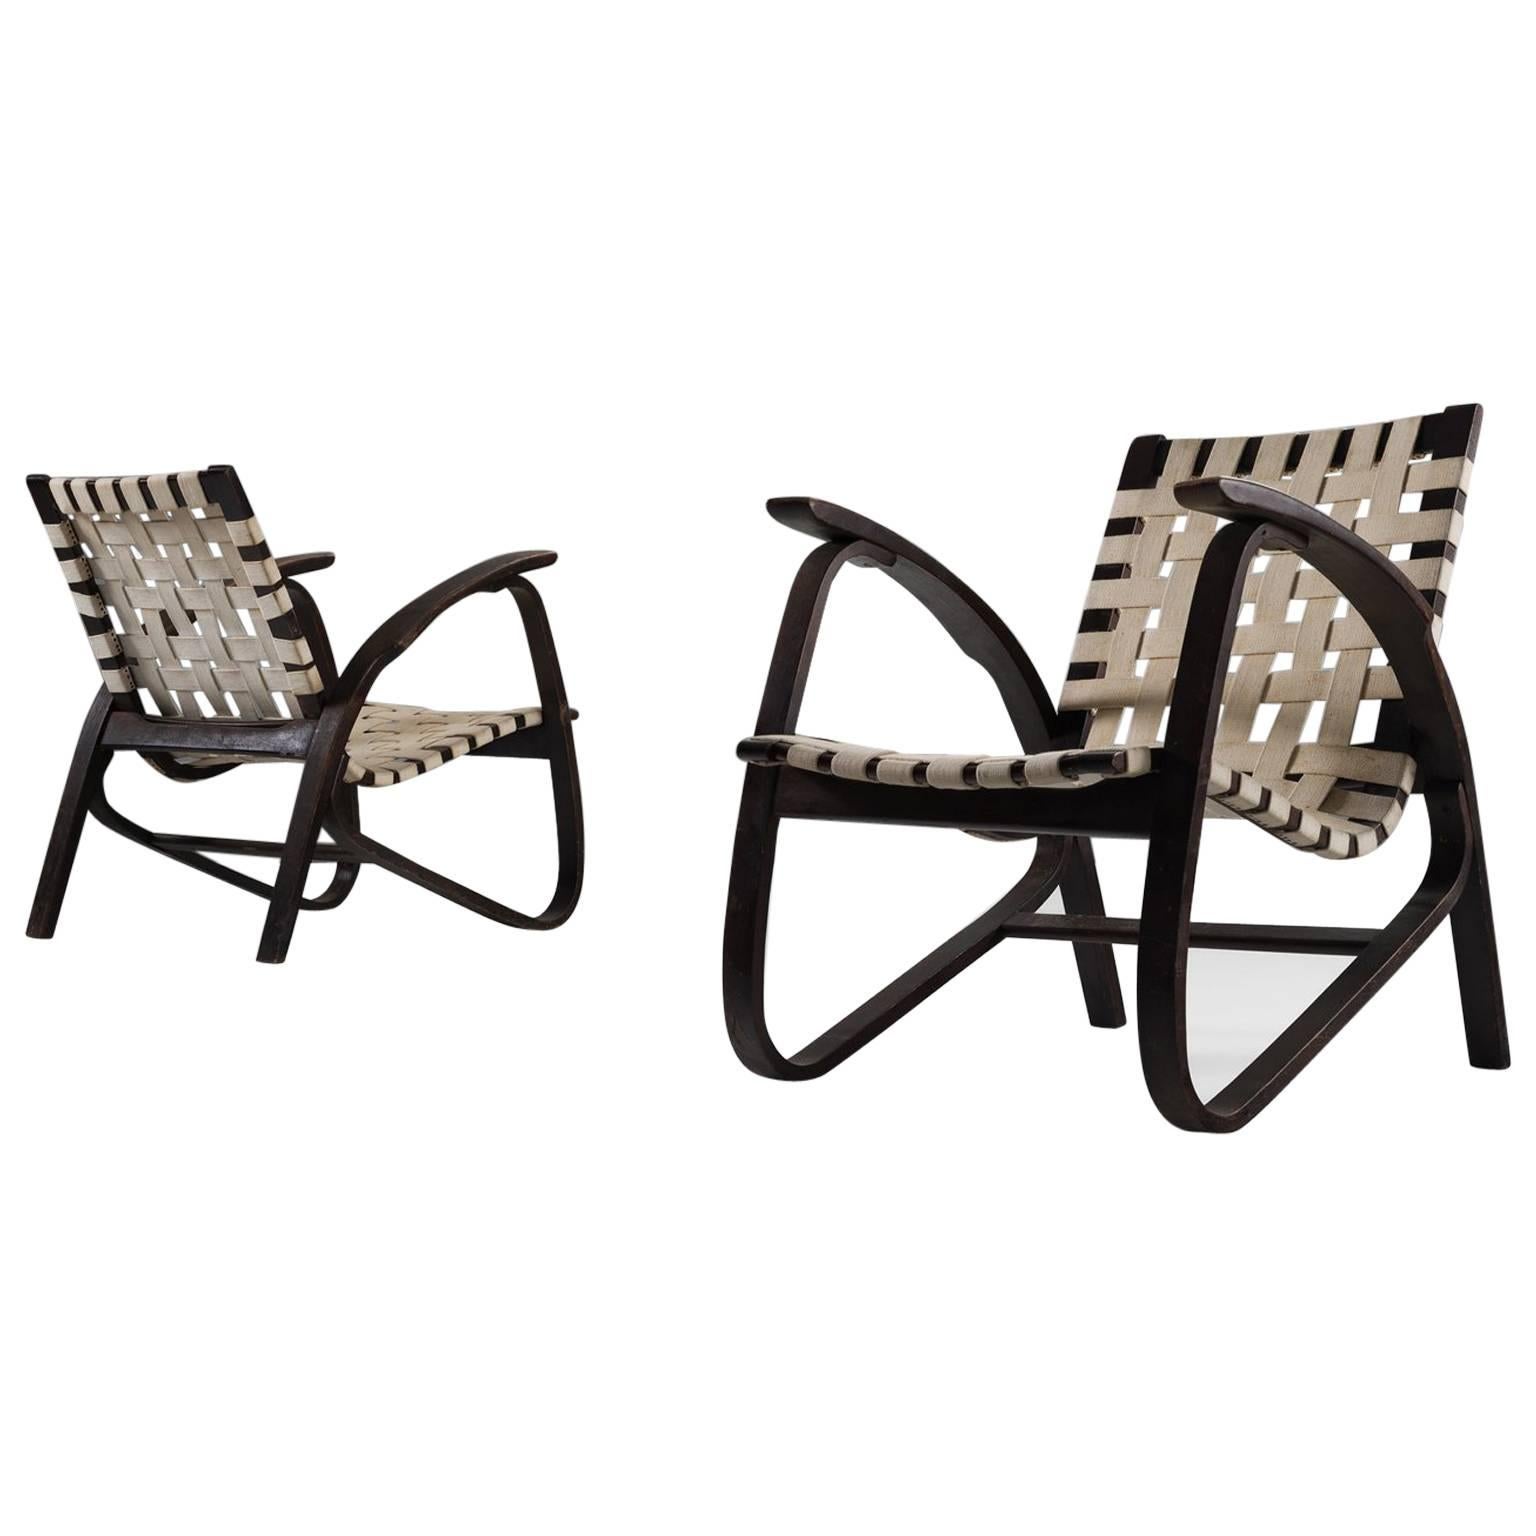 Two Jan Vanek Lounge Chairs for UP Zavodny